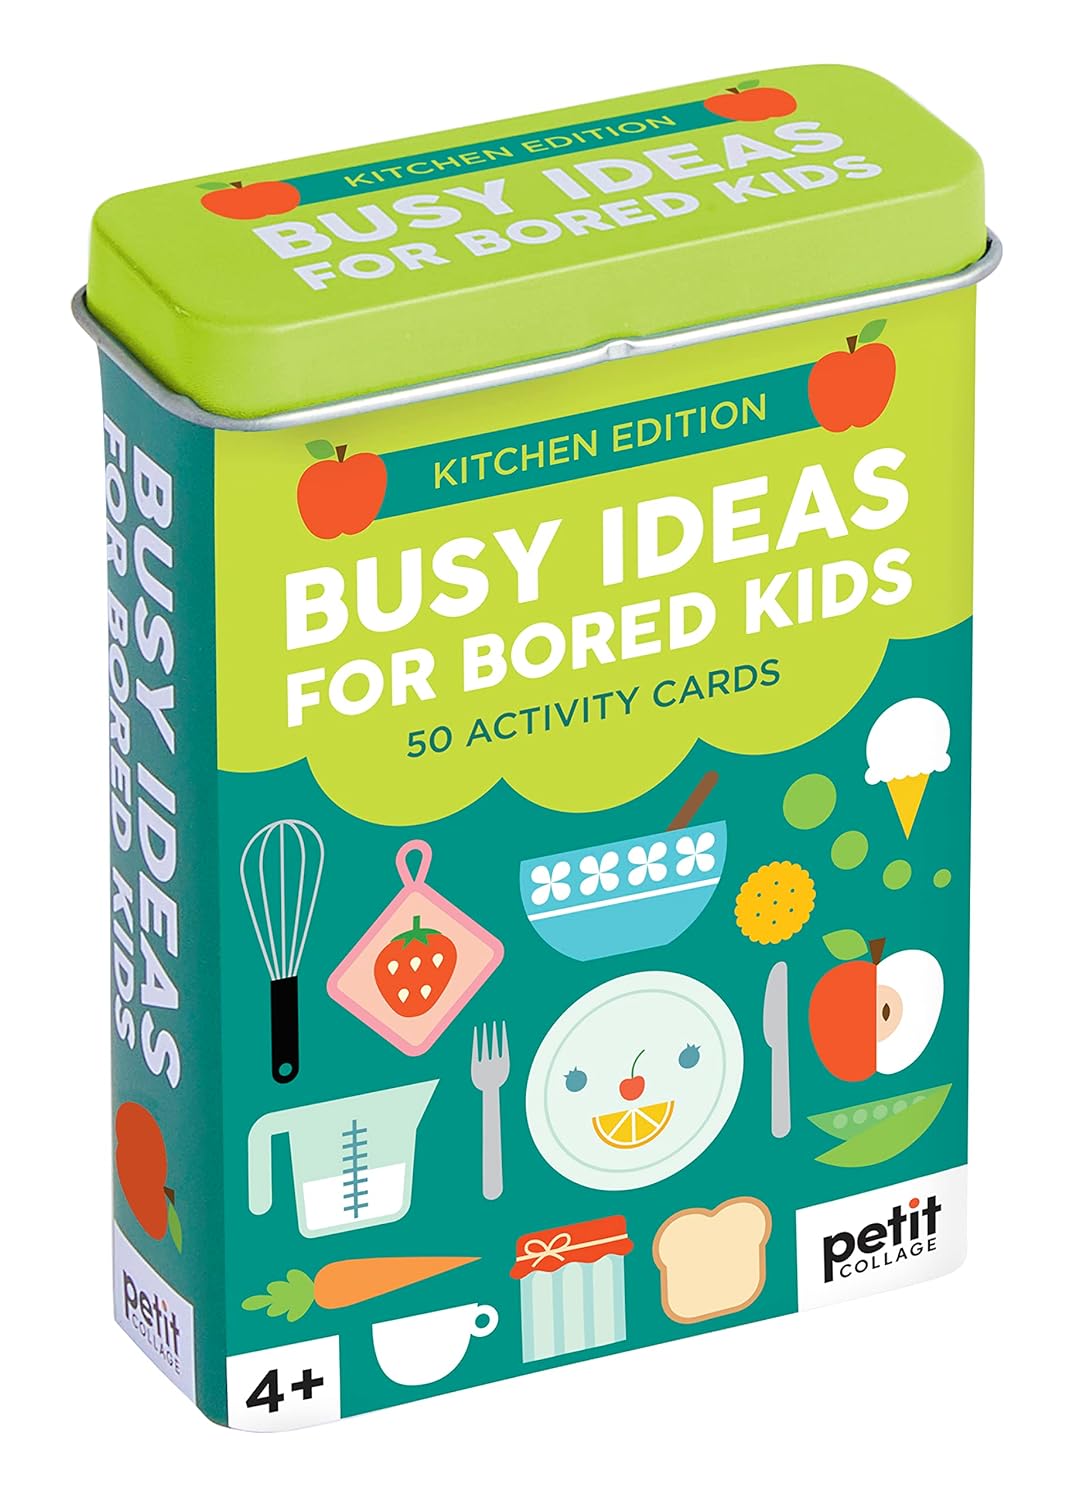 Busy Ideas For Bored Kids - Kitchen Edition